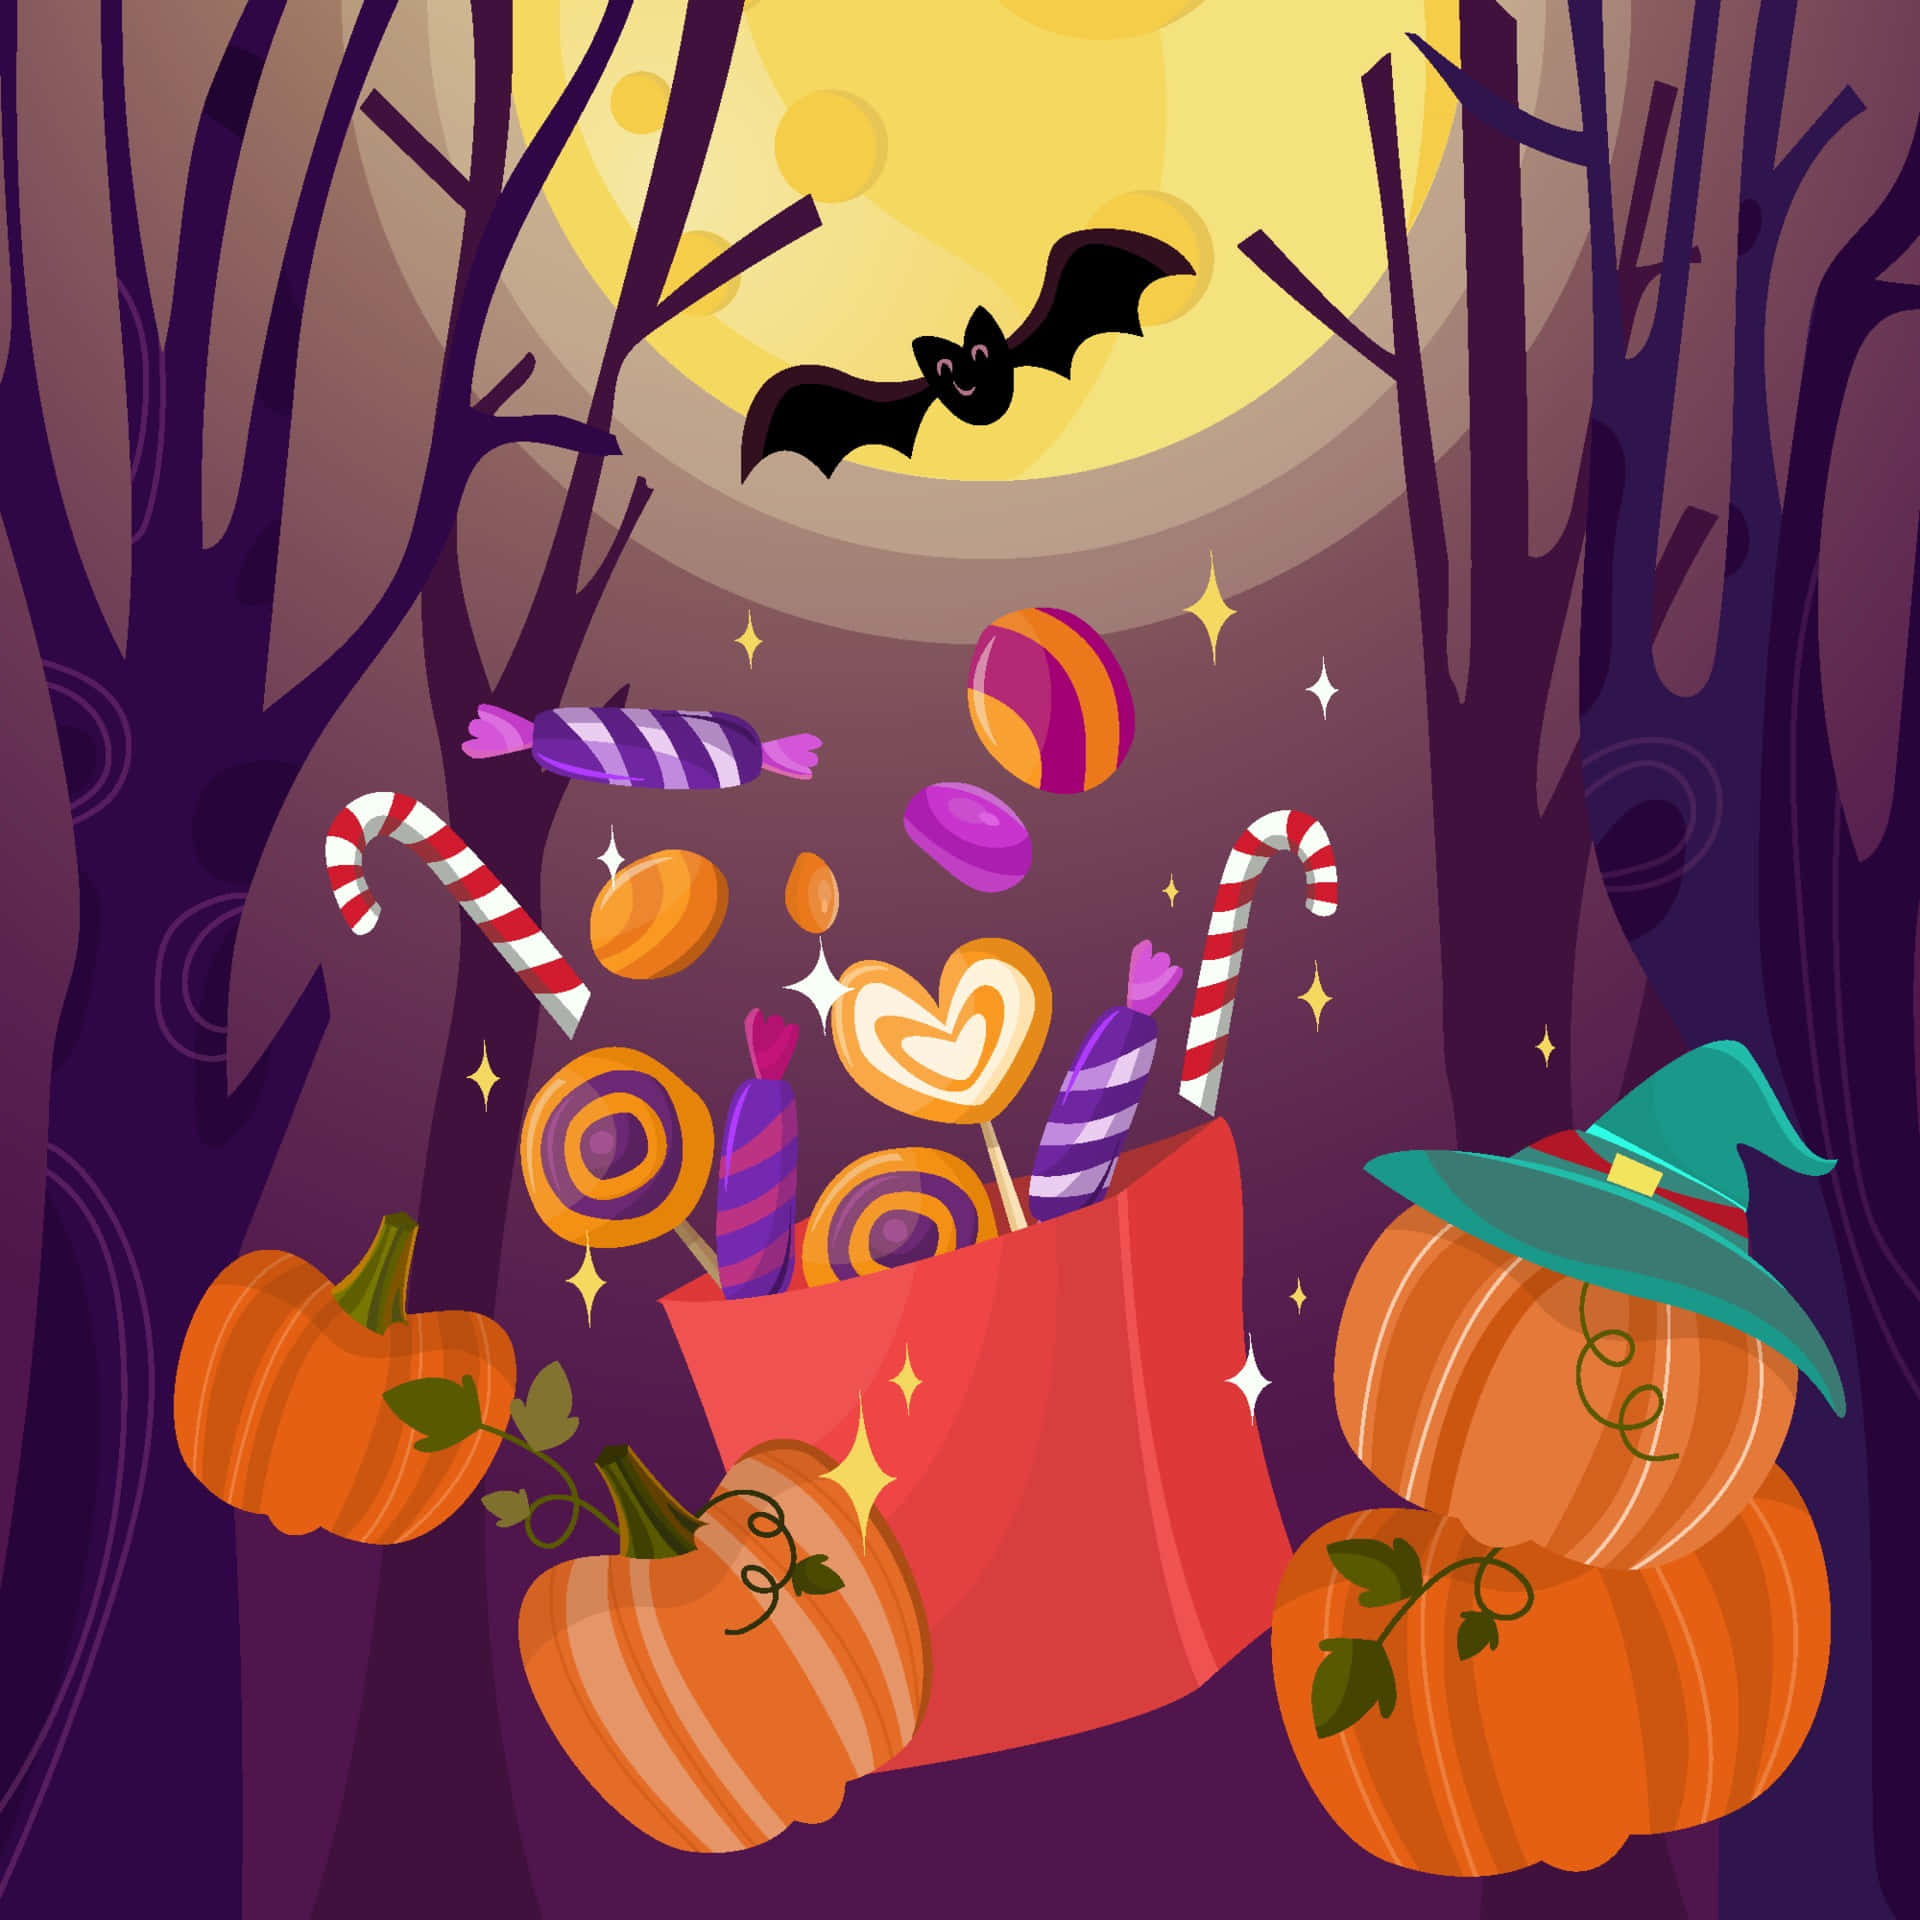 Get Ready for Trick or Treat with This Fun Bags Wallpaper